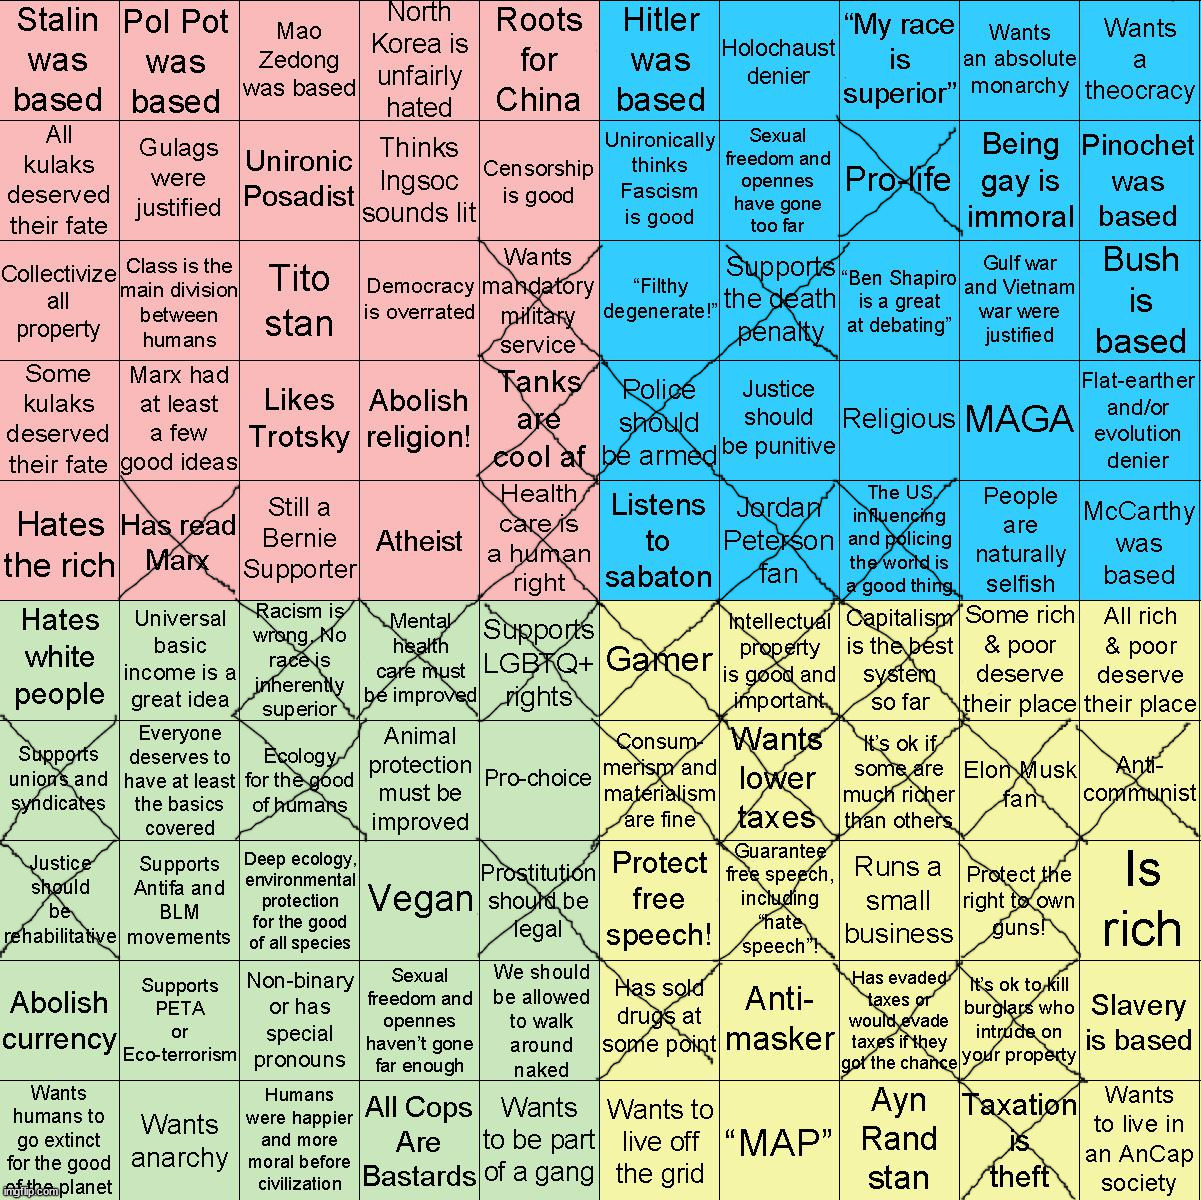 I am extremely bored right now | image tagged in political compass bingo | made w/ Imgflip meme maker